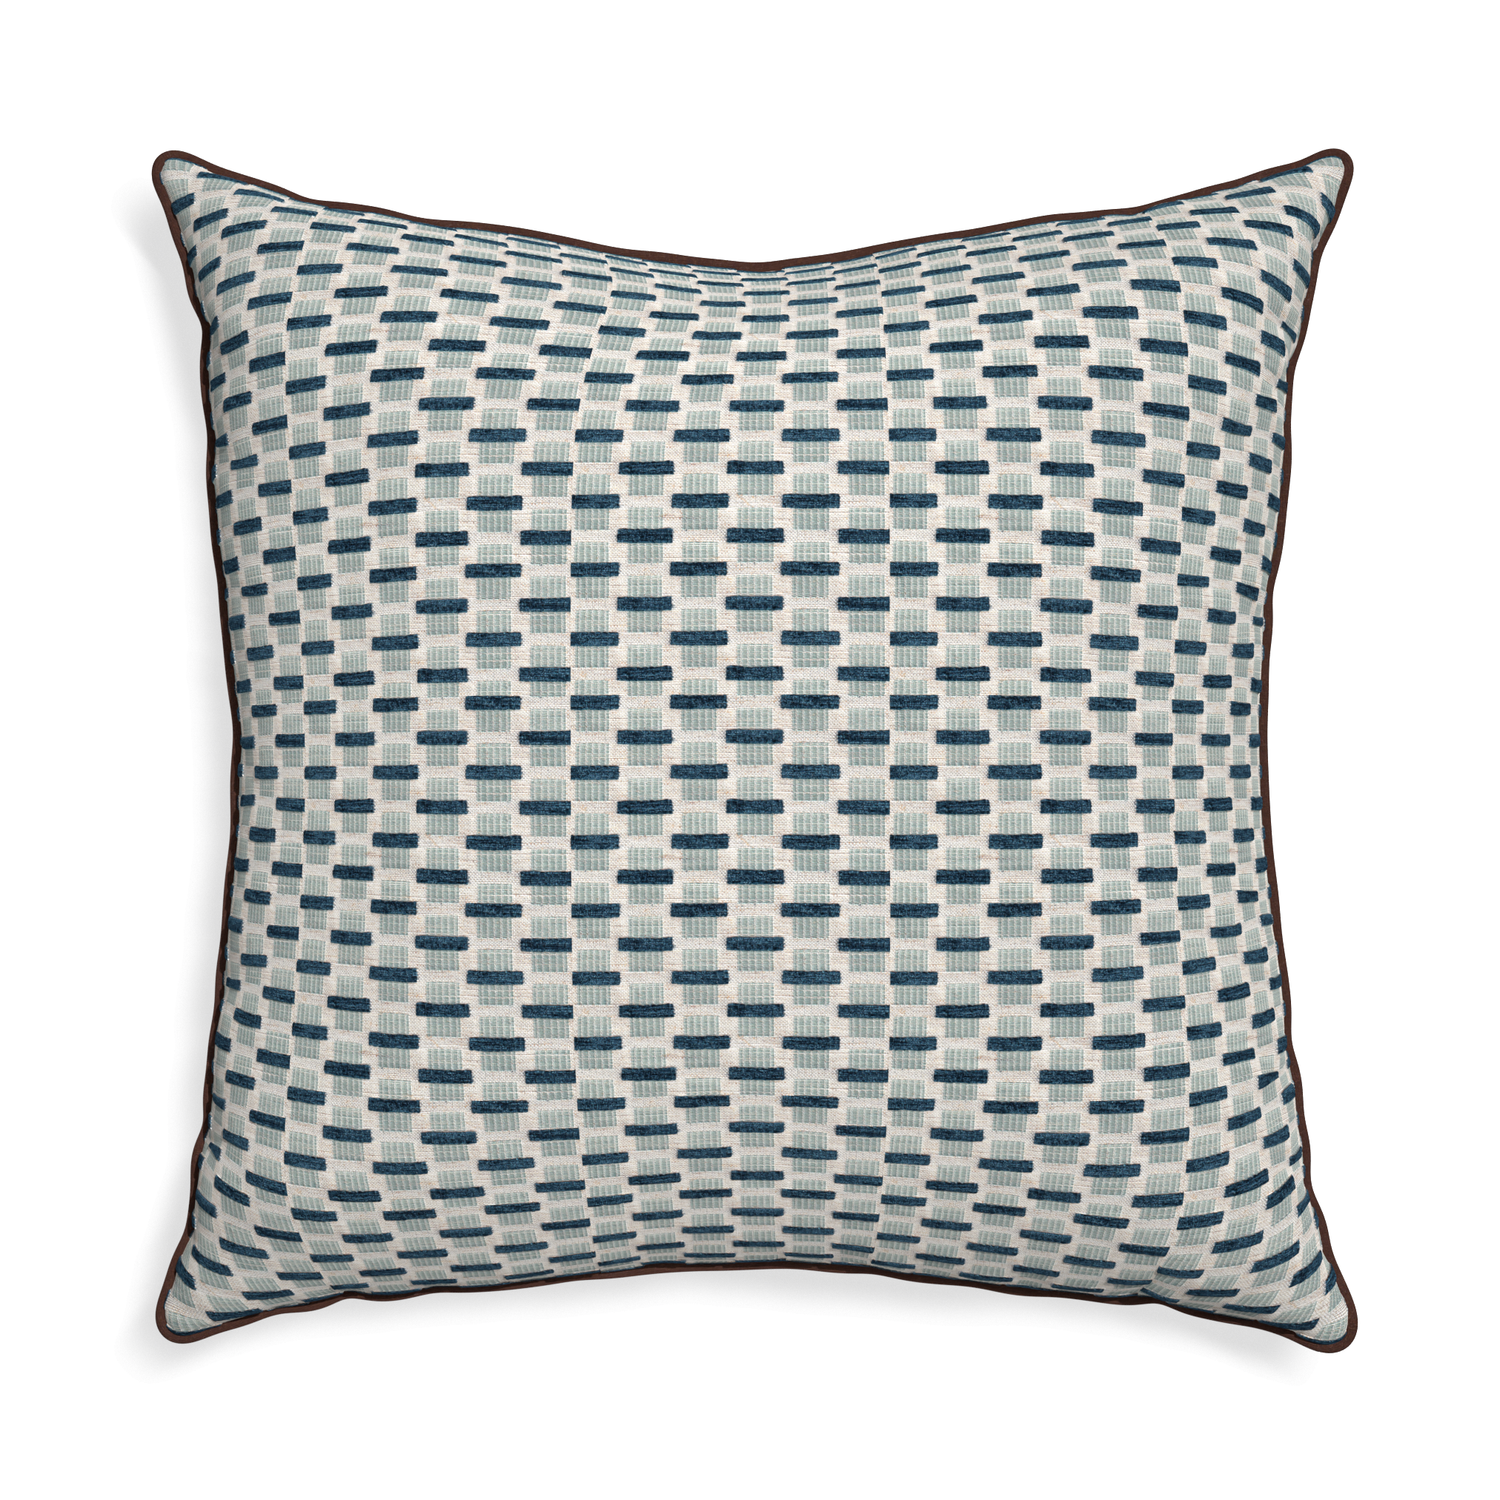 Euro-sham willow amalfi custom blue geometric chenillepillow with w piping on white background